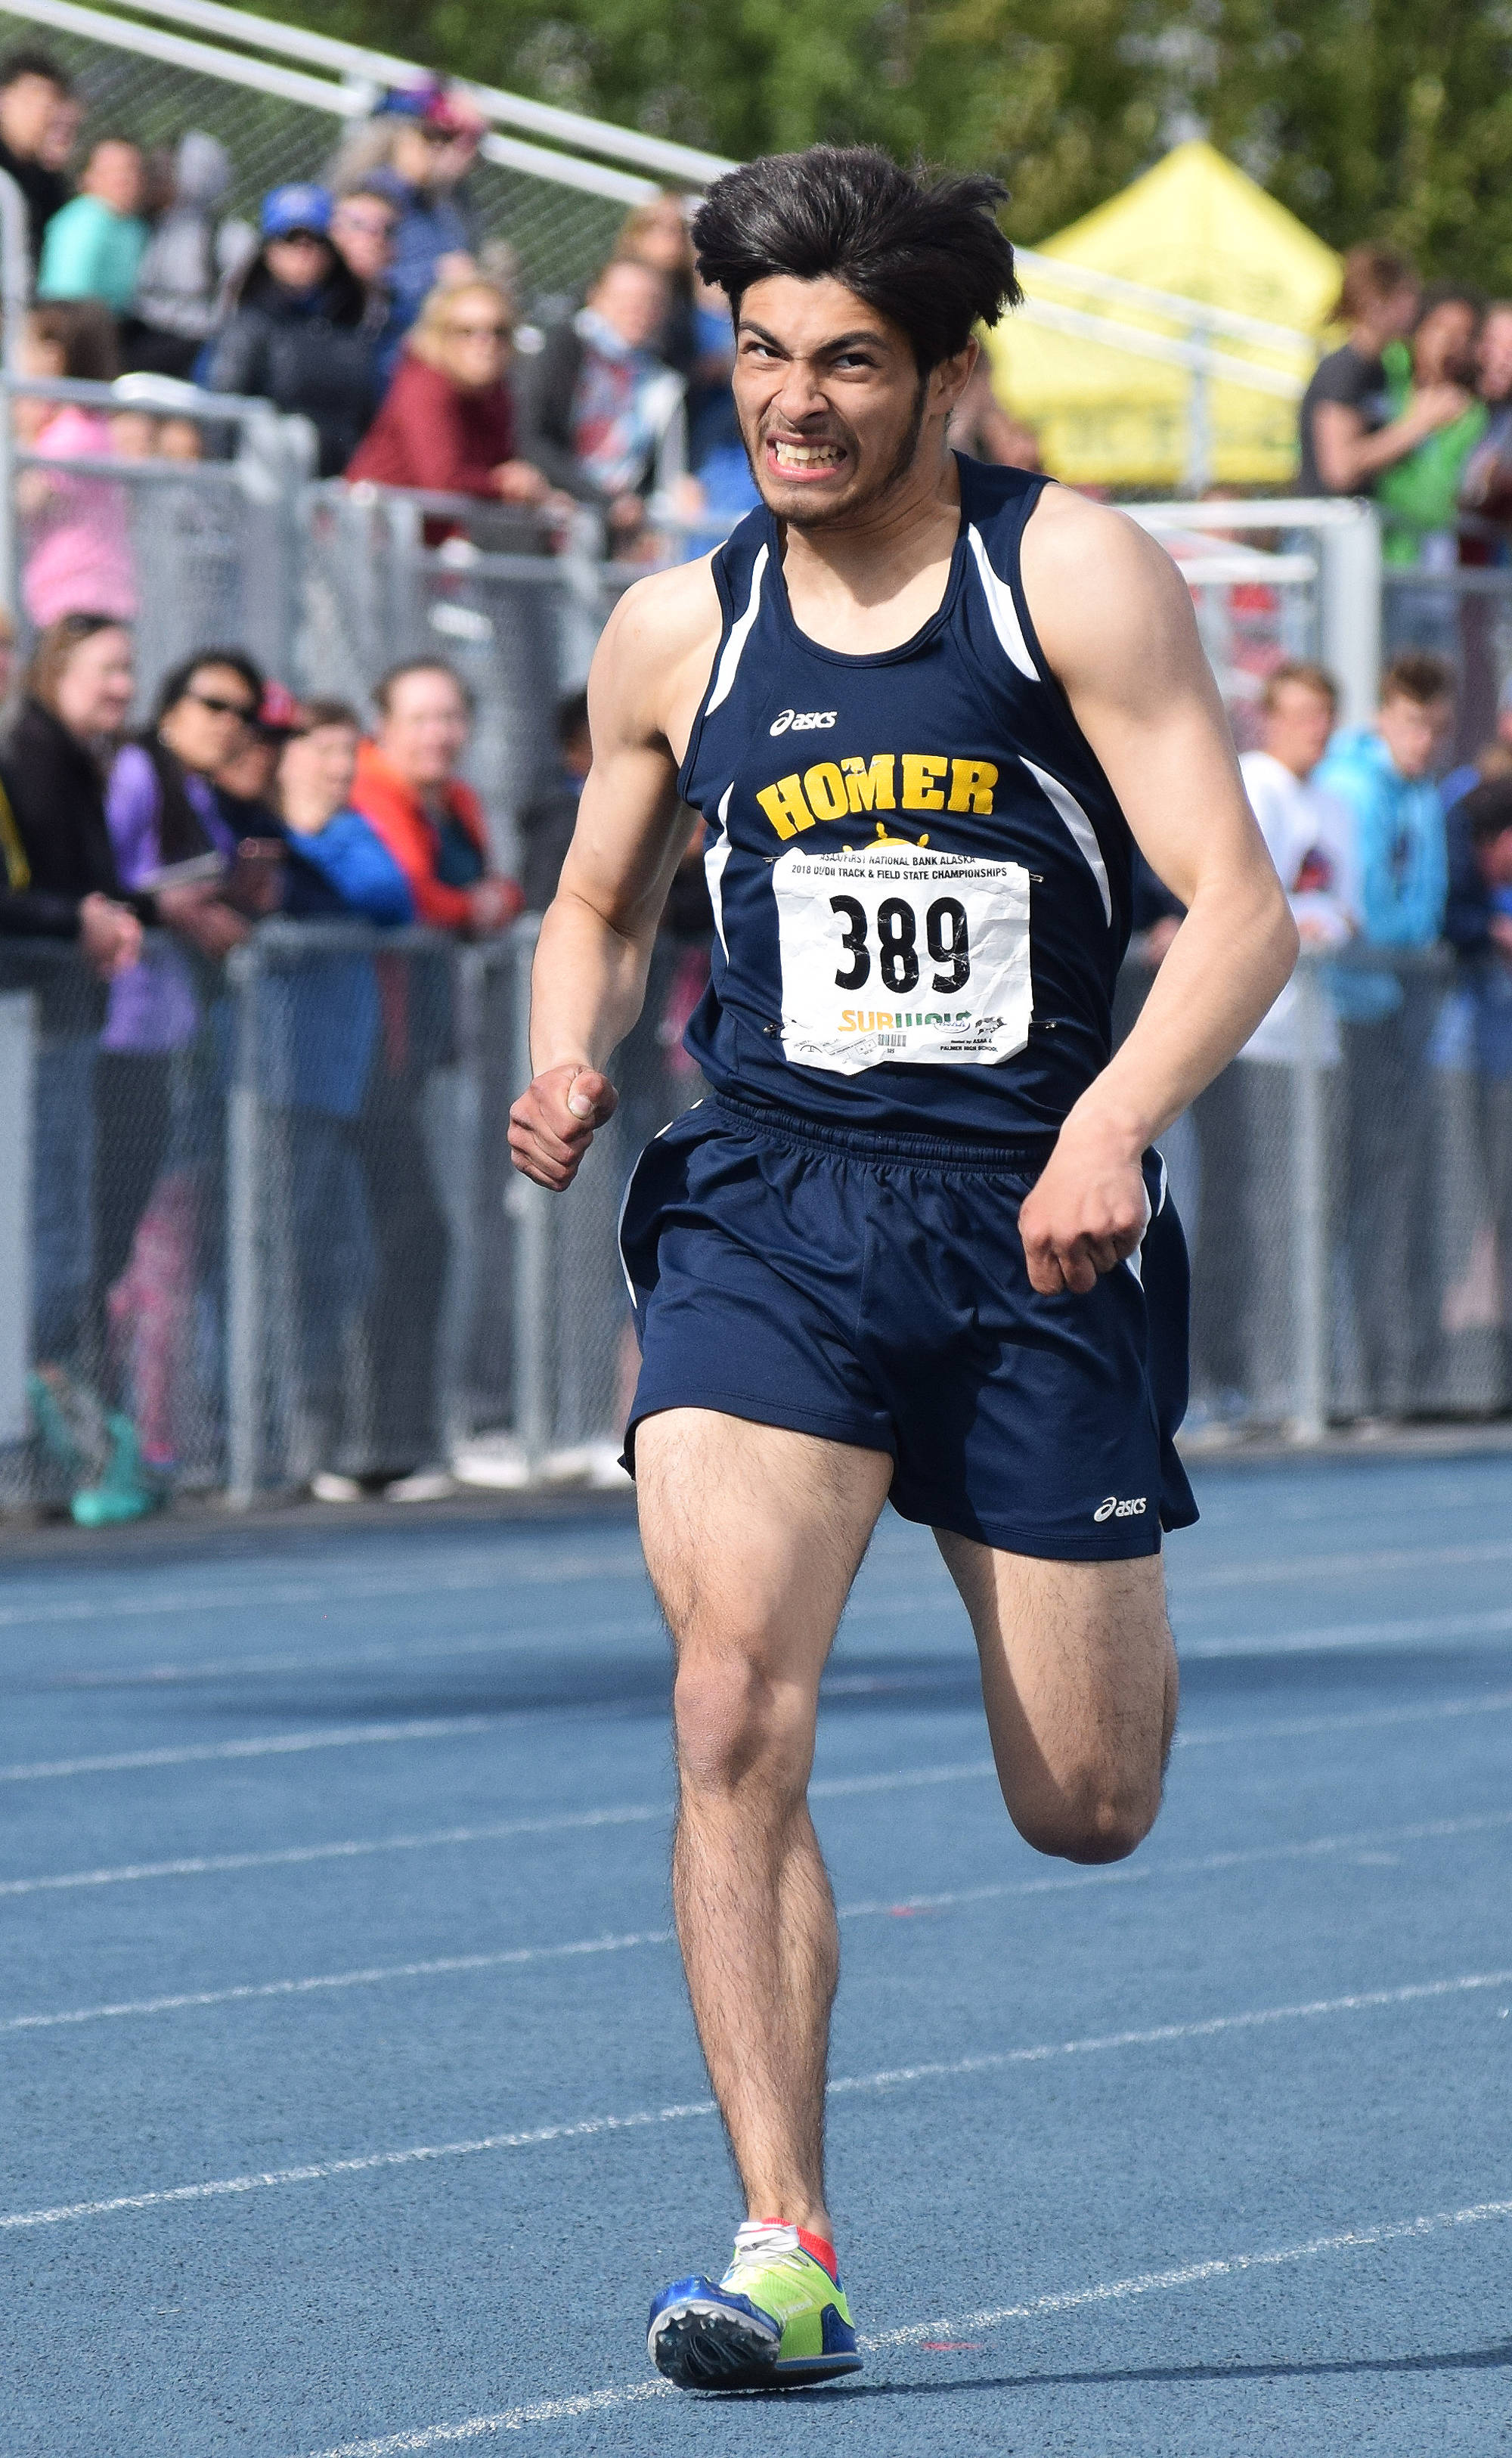 Photo by Joey Klecka/Peninsula Clarion Homer’s Luciano Fasulo sprints to the finish of the Division II boys 800-meter race Saturday, May 26 at the Alaska Track and Field state championship meet at Palmer High School.